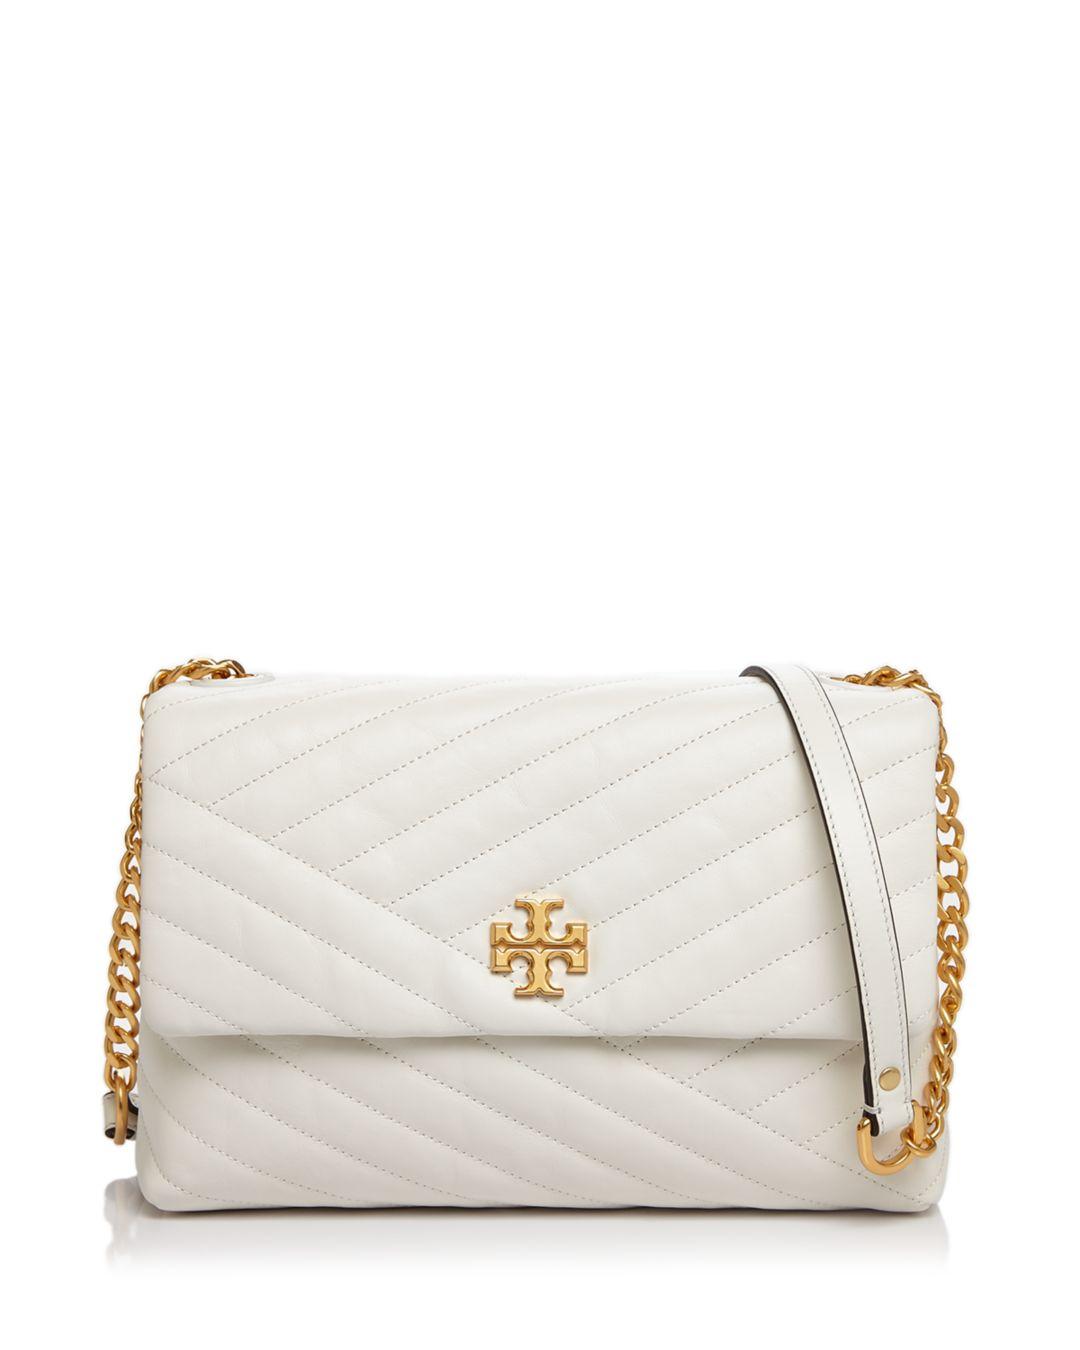 Tory Burch Kira Chevron Quilted Leather Shoulder Bag - Save 37% - Lyst